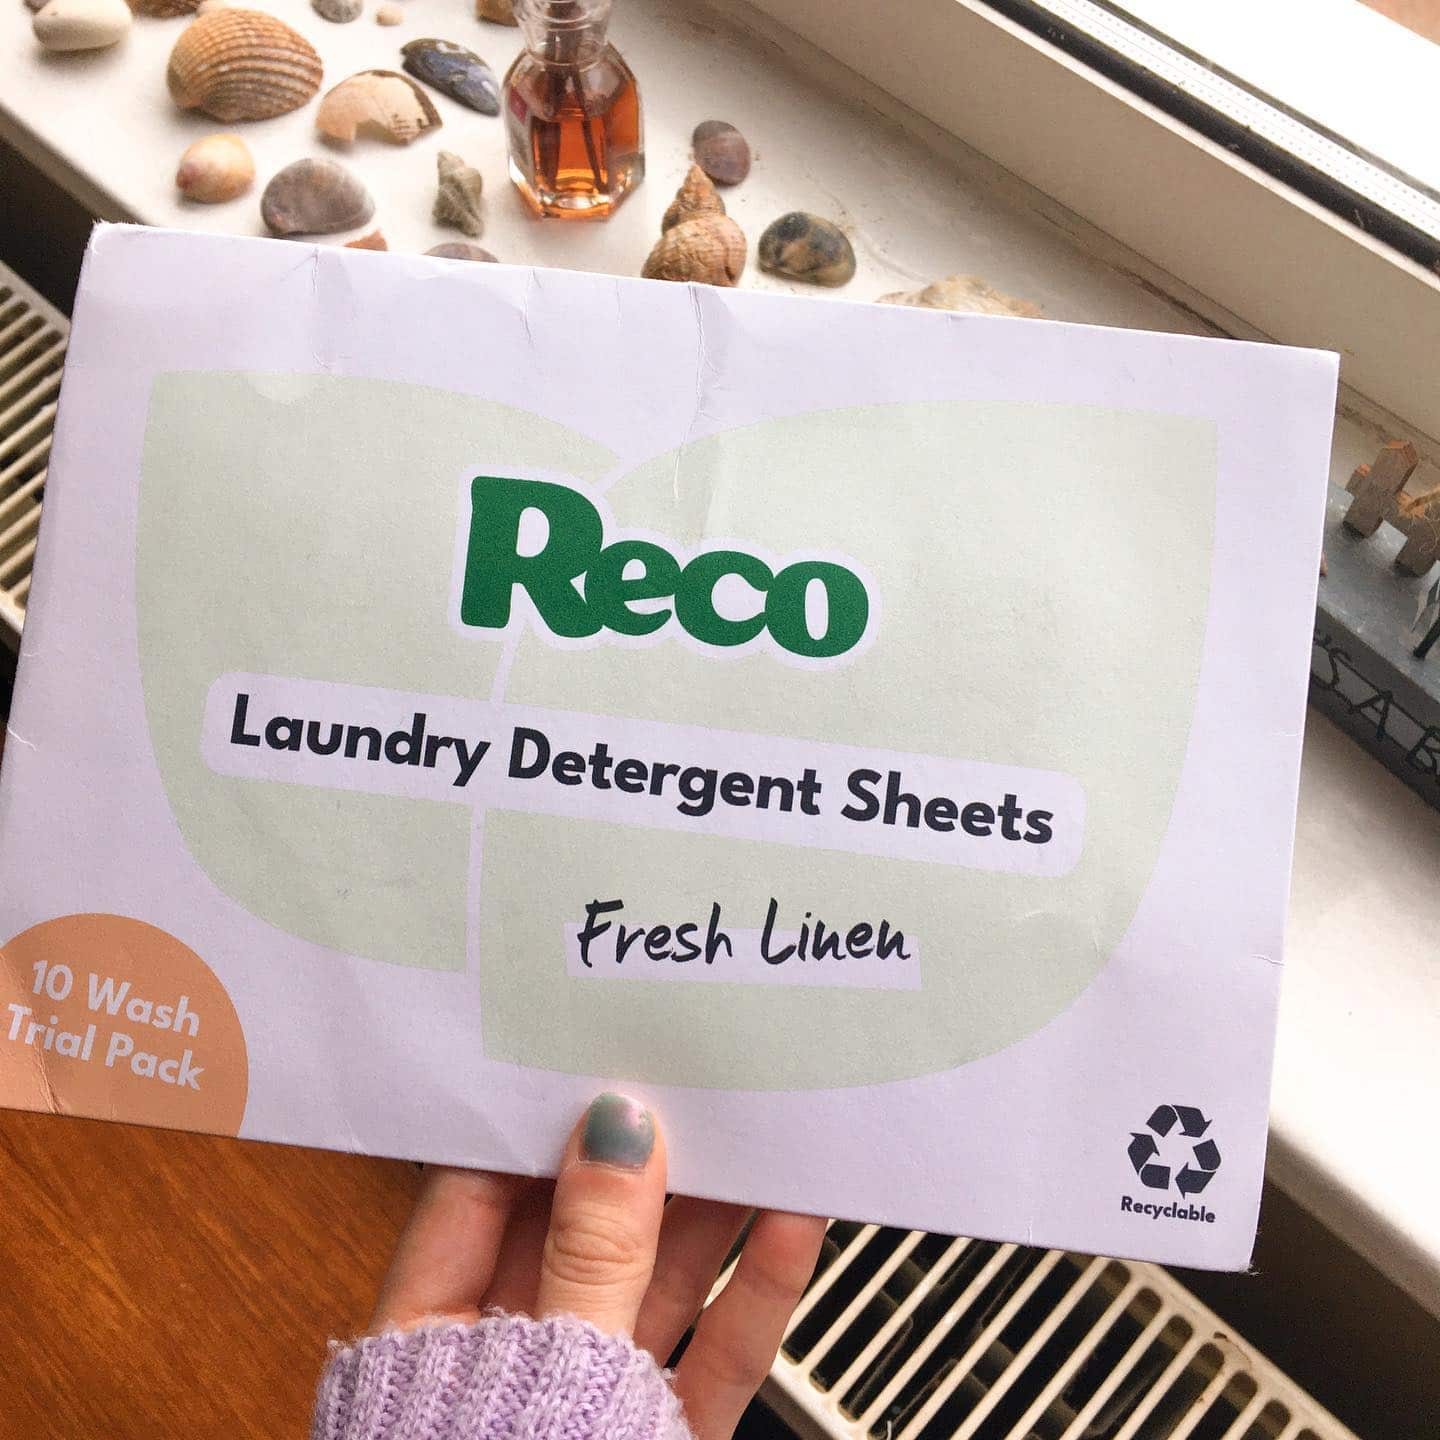 (AD/PR Product) How do you make your washing more eco-friendly?
-
There are a few super simple ways to make your washing more eco-friendly! The easiest way is to choose the cold option, or 30 degrees if you don’t have one. 
-
Another way is to use an eco-friendly laundry detergent 🧺. Reco laundry detergent sheets are really affordable & eco-friendly! All you do is put them at the bottom of your washing machine, before putting your laundry in. 
-
For more ways to make your washing more eco-friendly, check out my blog 💚 link in bio